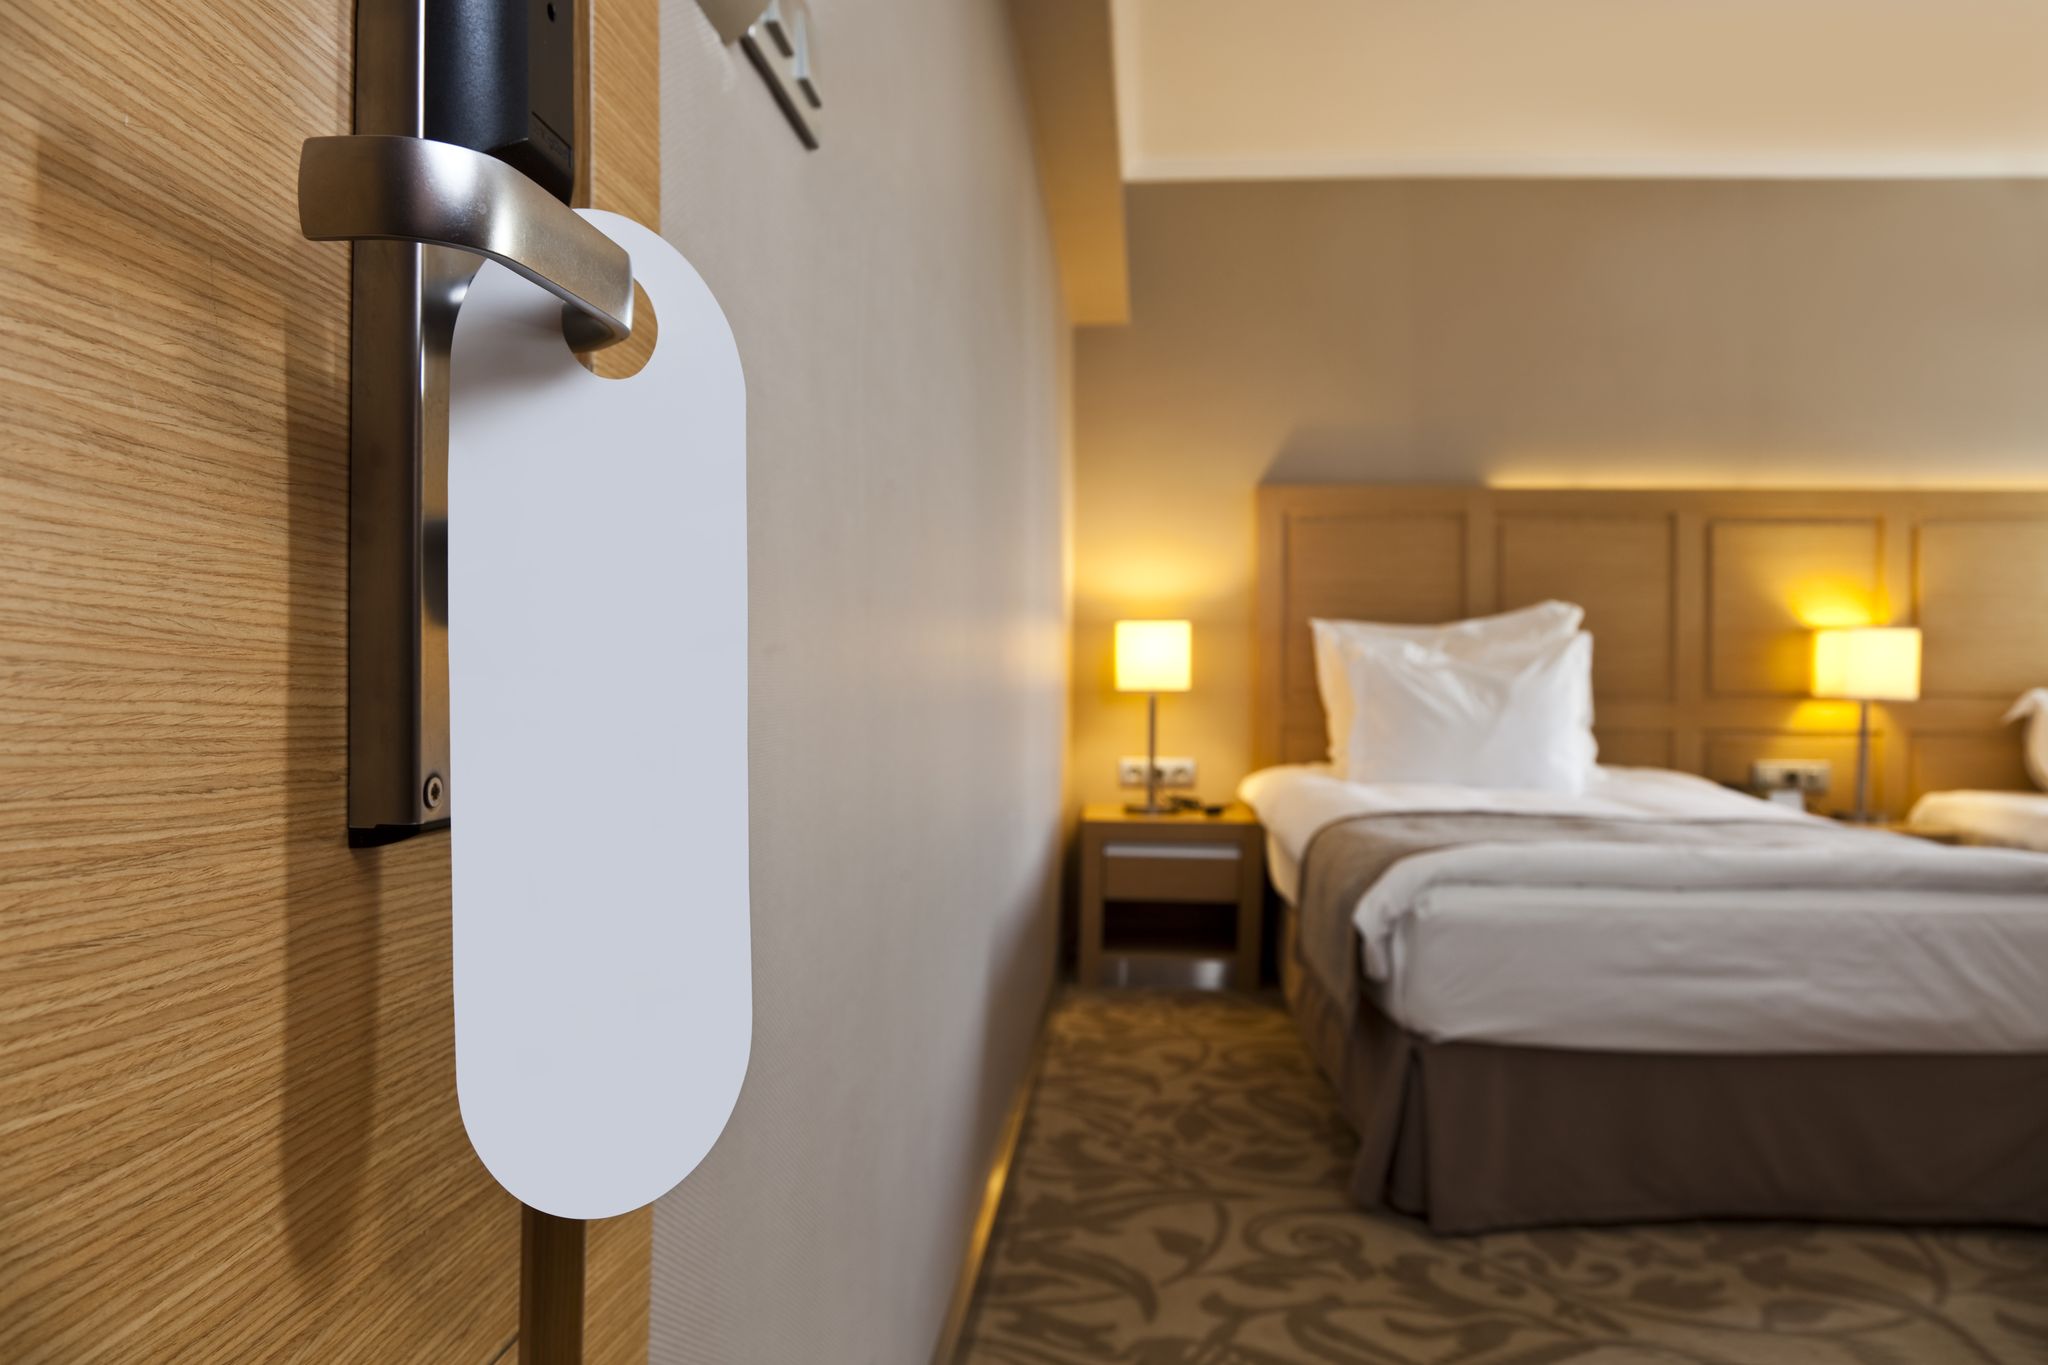 The hotel chain voted the worst in Britain